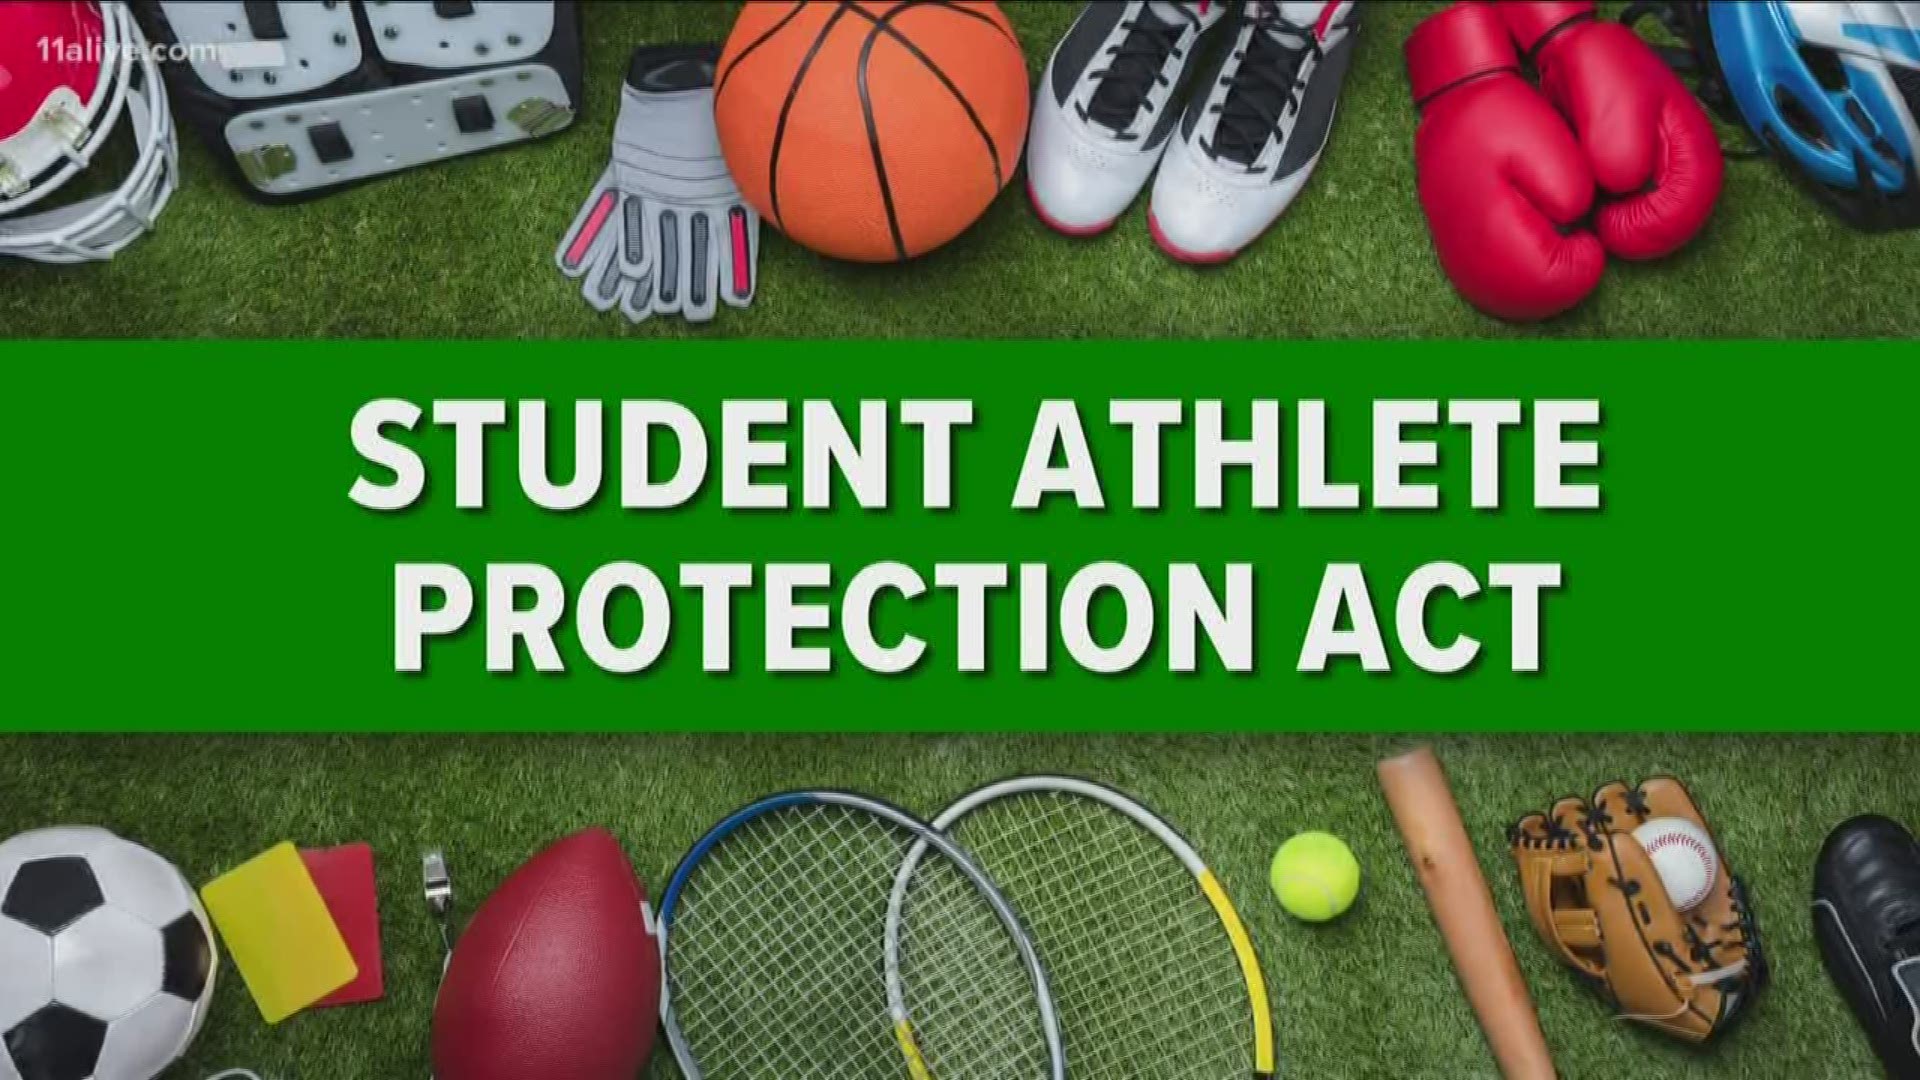 Rep. Philip Singleton pre-filed the Student Athlete Protection Act this week. It will formally be introduced during the 2020 legislative session.